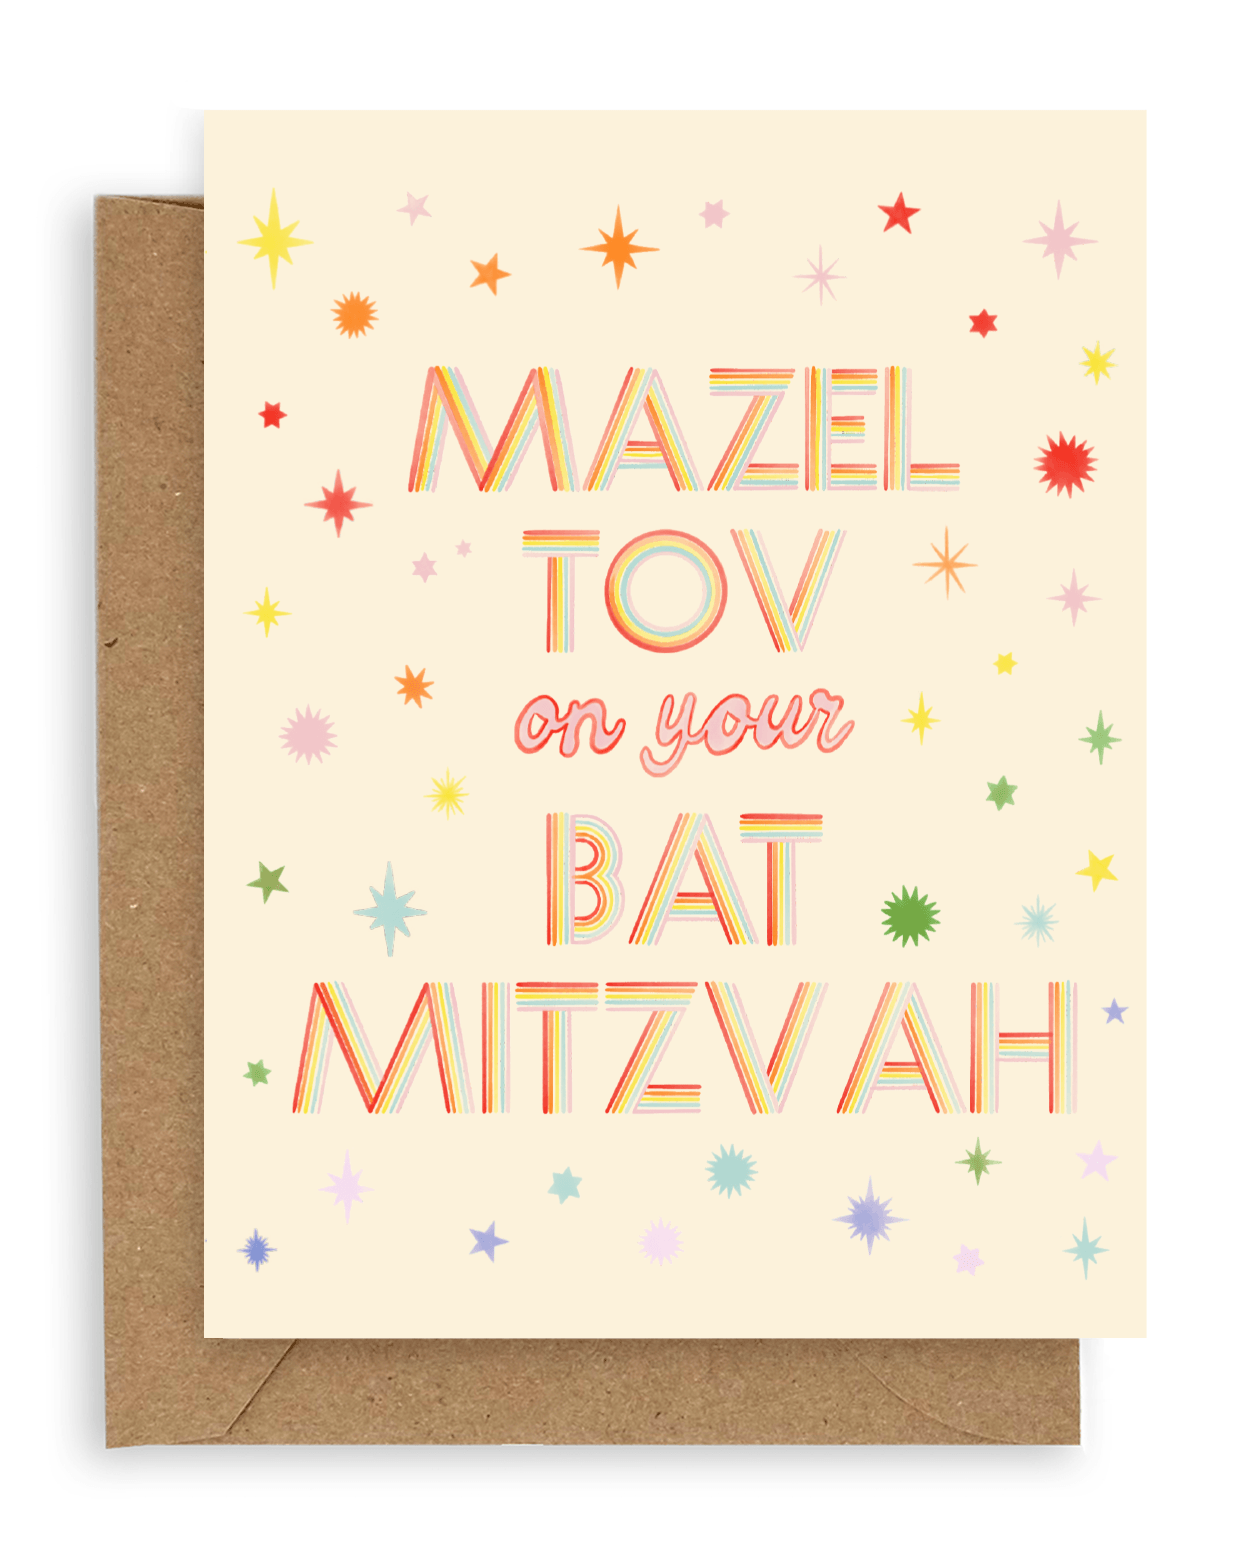 Rainbow colored stars surround the words &quot;Mazel tov on your bat mitzvah&quot; in multi-colored font printed on a cream background. Shown with kraft envelope.